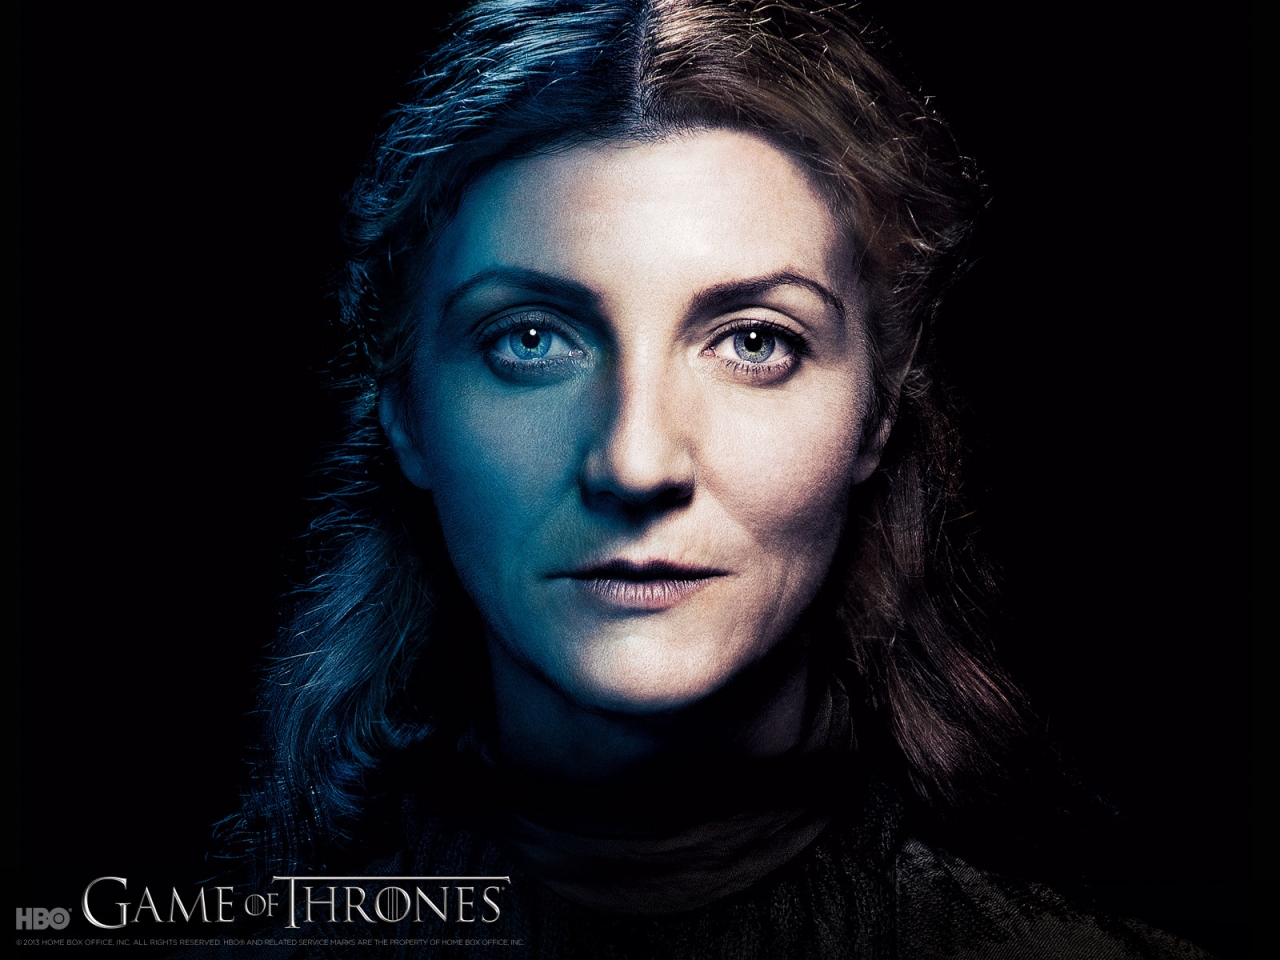 Catelyn Stark in Game of Thrones for 1280 x 960 resolution